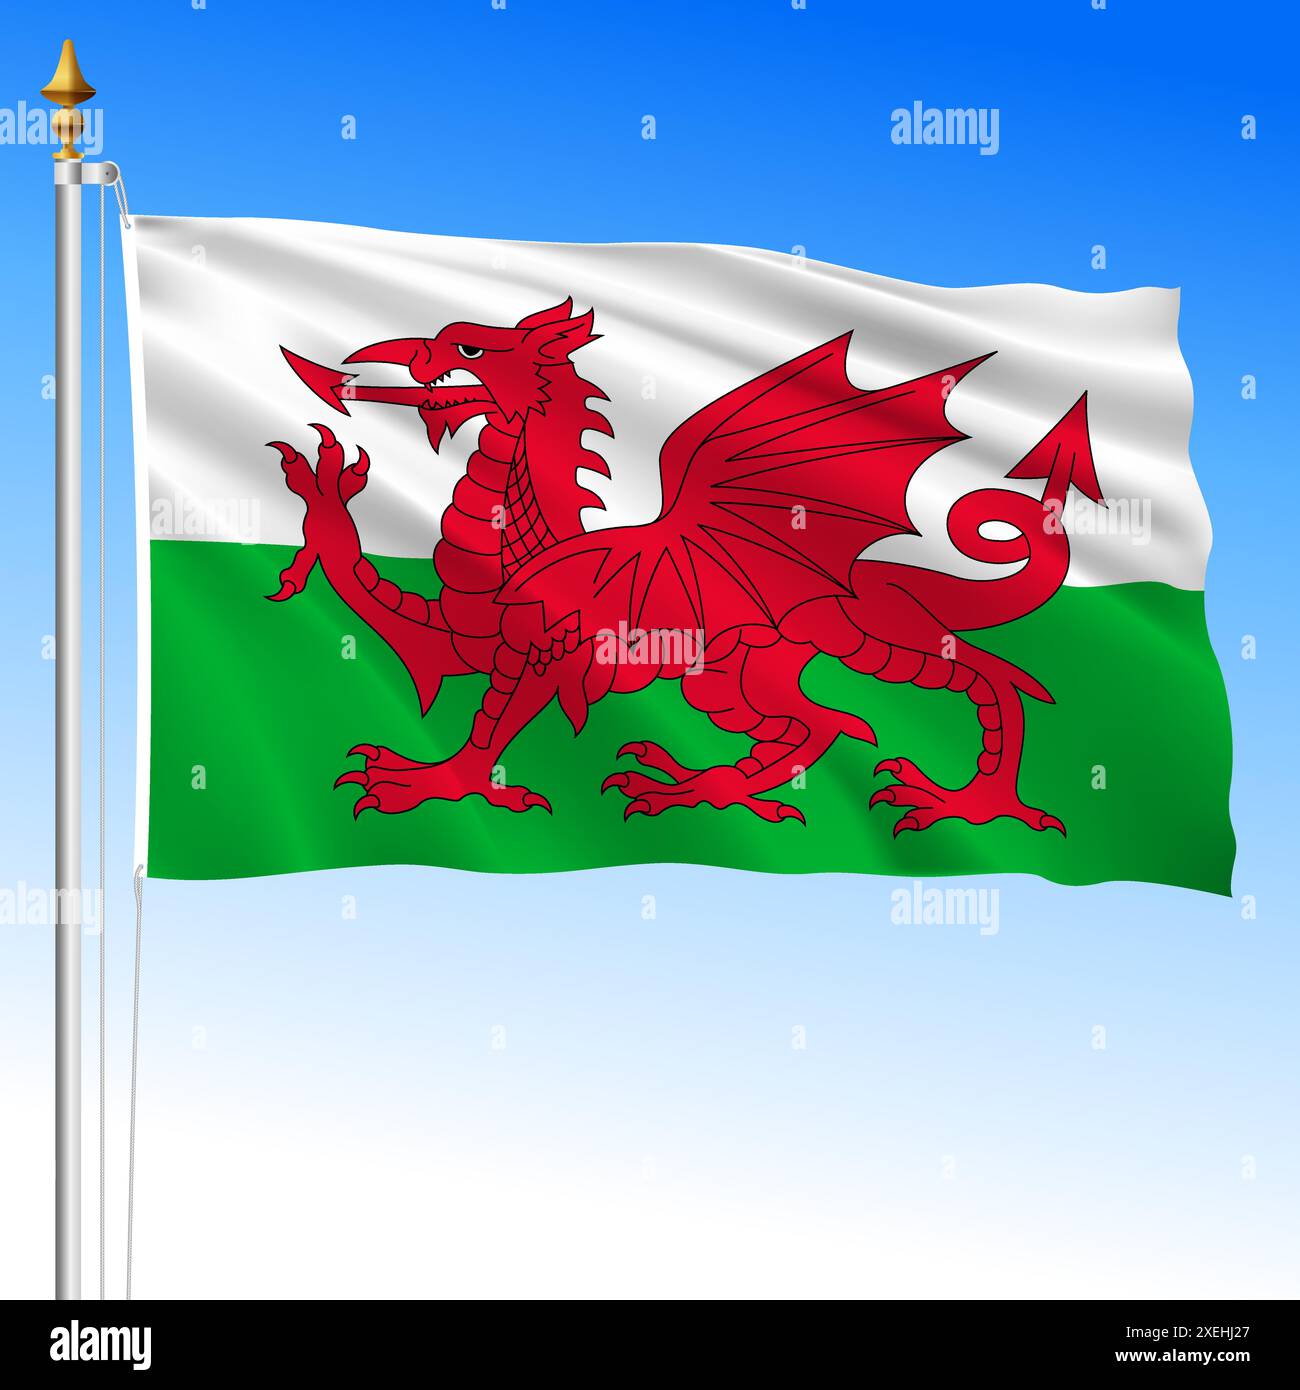 Wales official waving flag, region of the United Kingdom, vector illustration Stock Vector